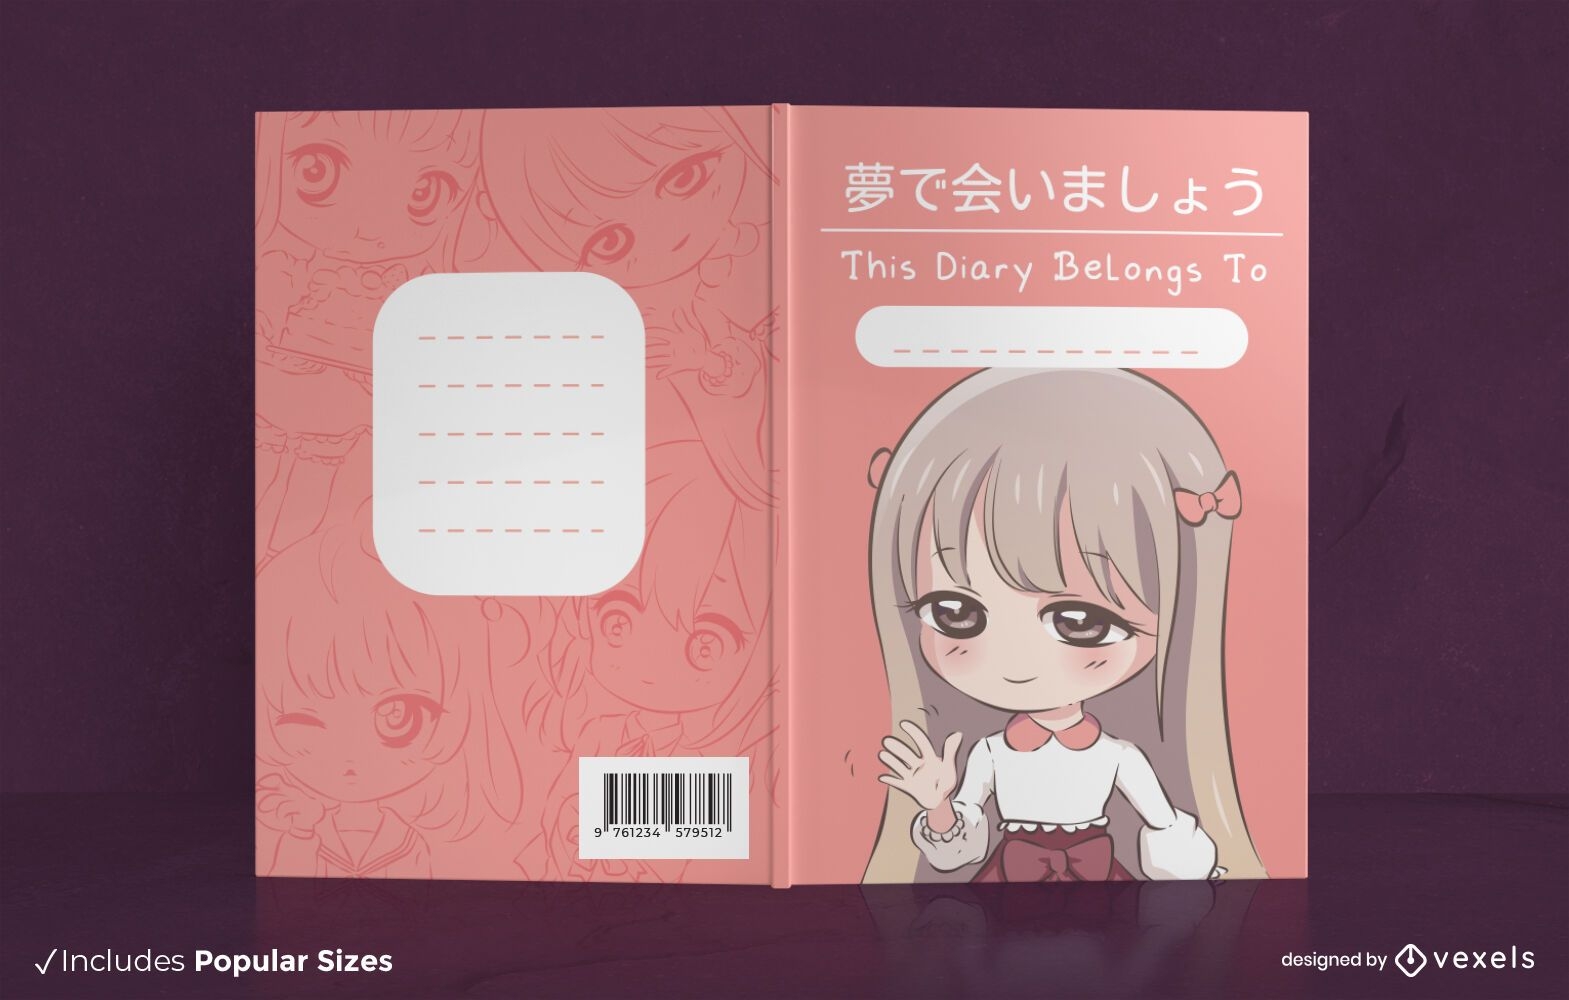 How to draw anime | extravagant book cover design | Book cover contest |  99designs